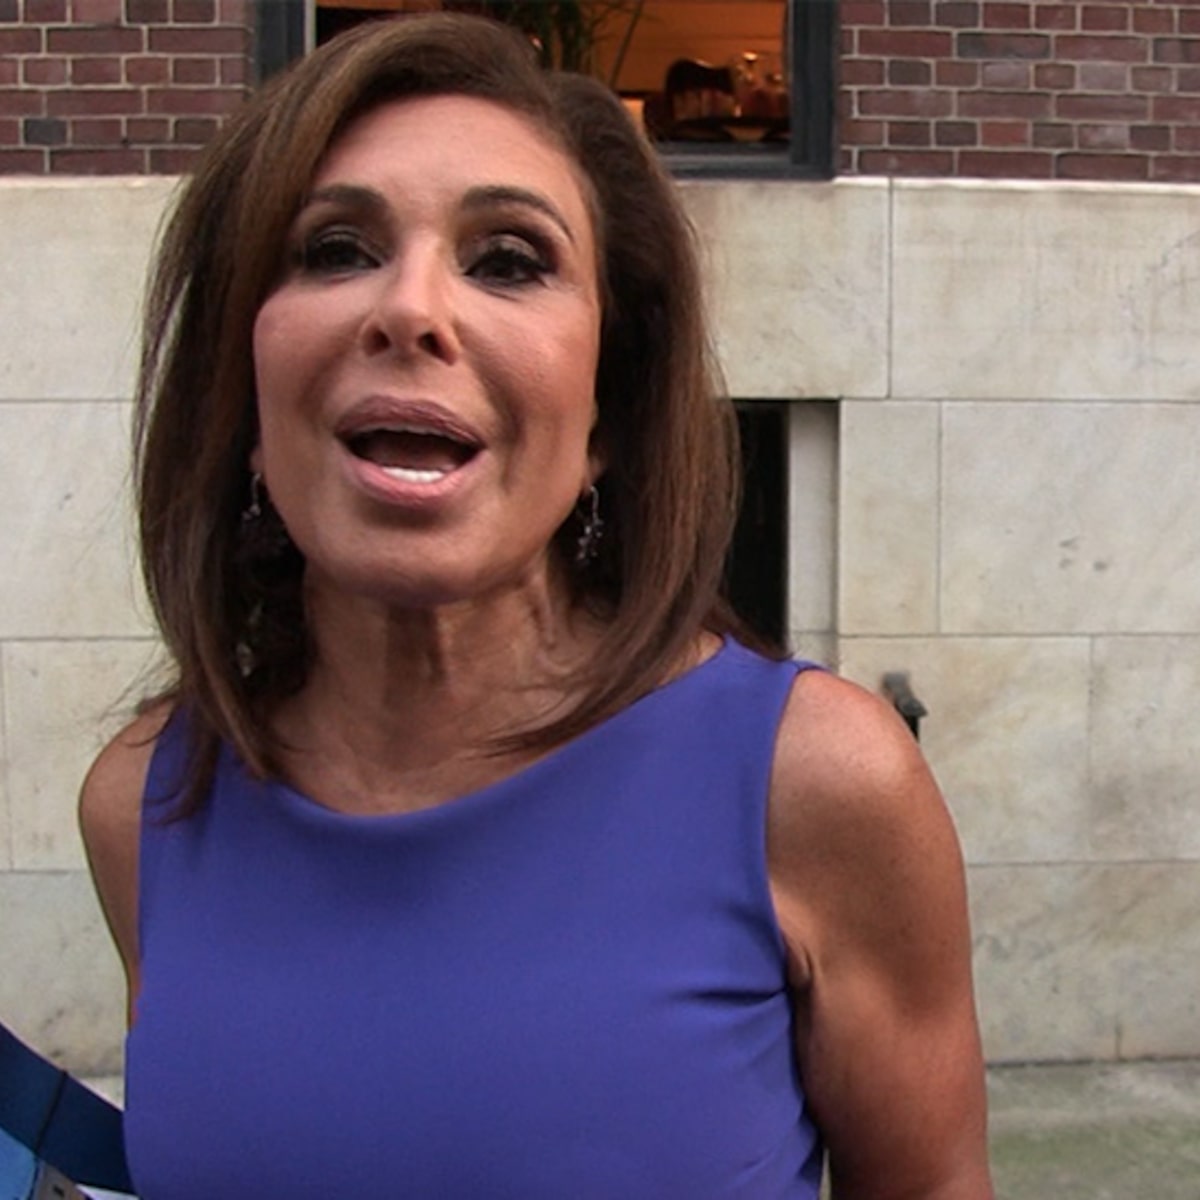 Jeanine Pirro says there was no call and "Democrats are hiding witness...